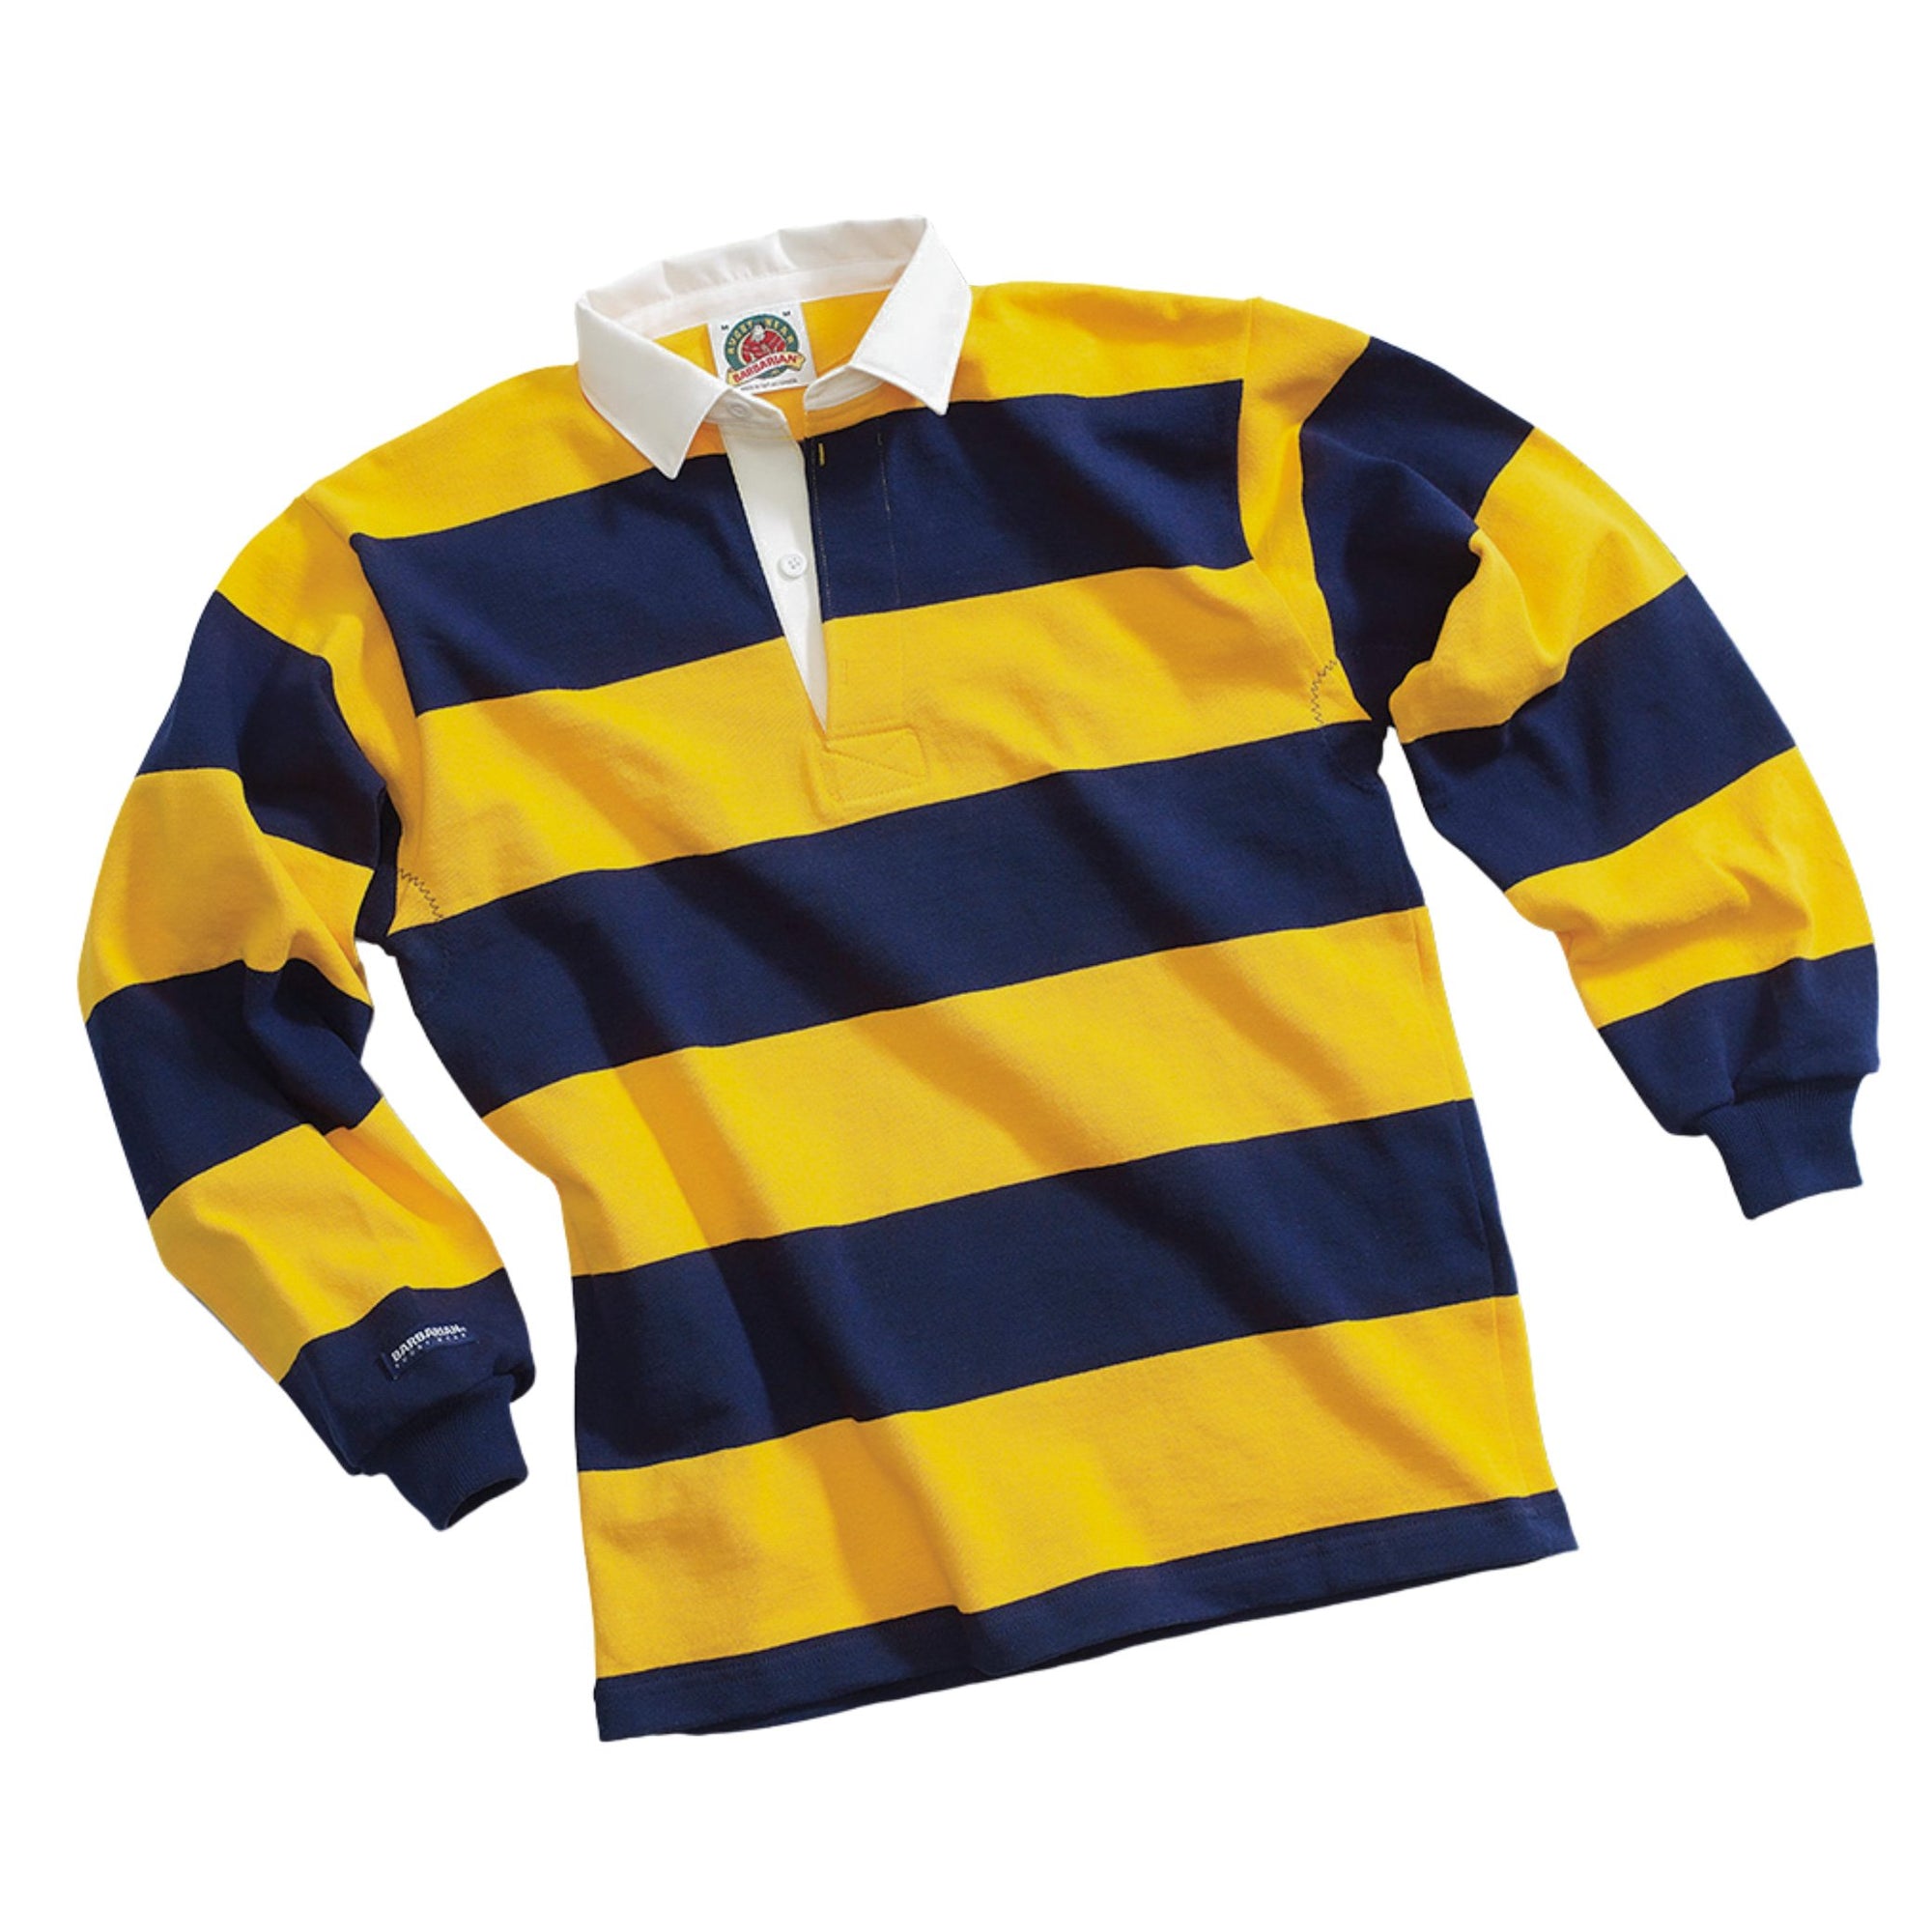 Rugby Supporter Gear & Accessories Online